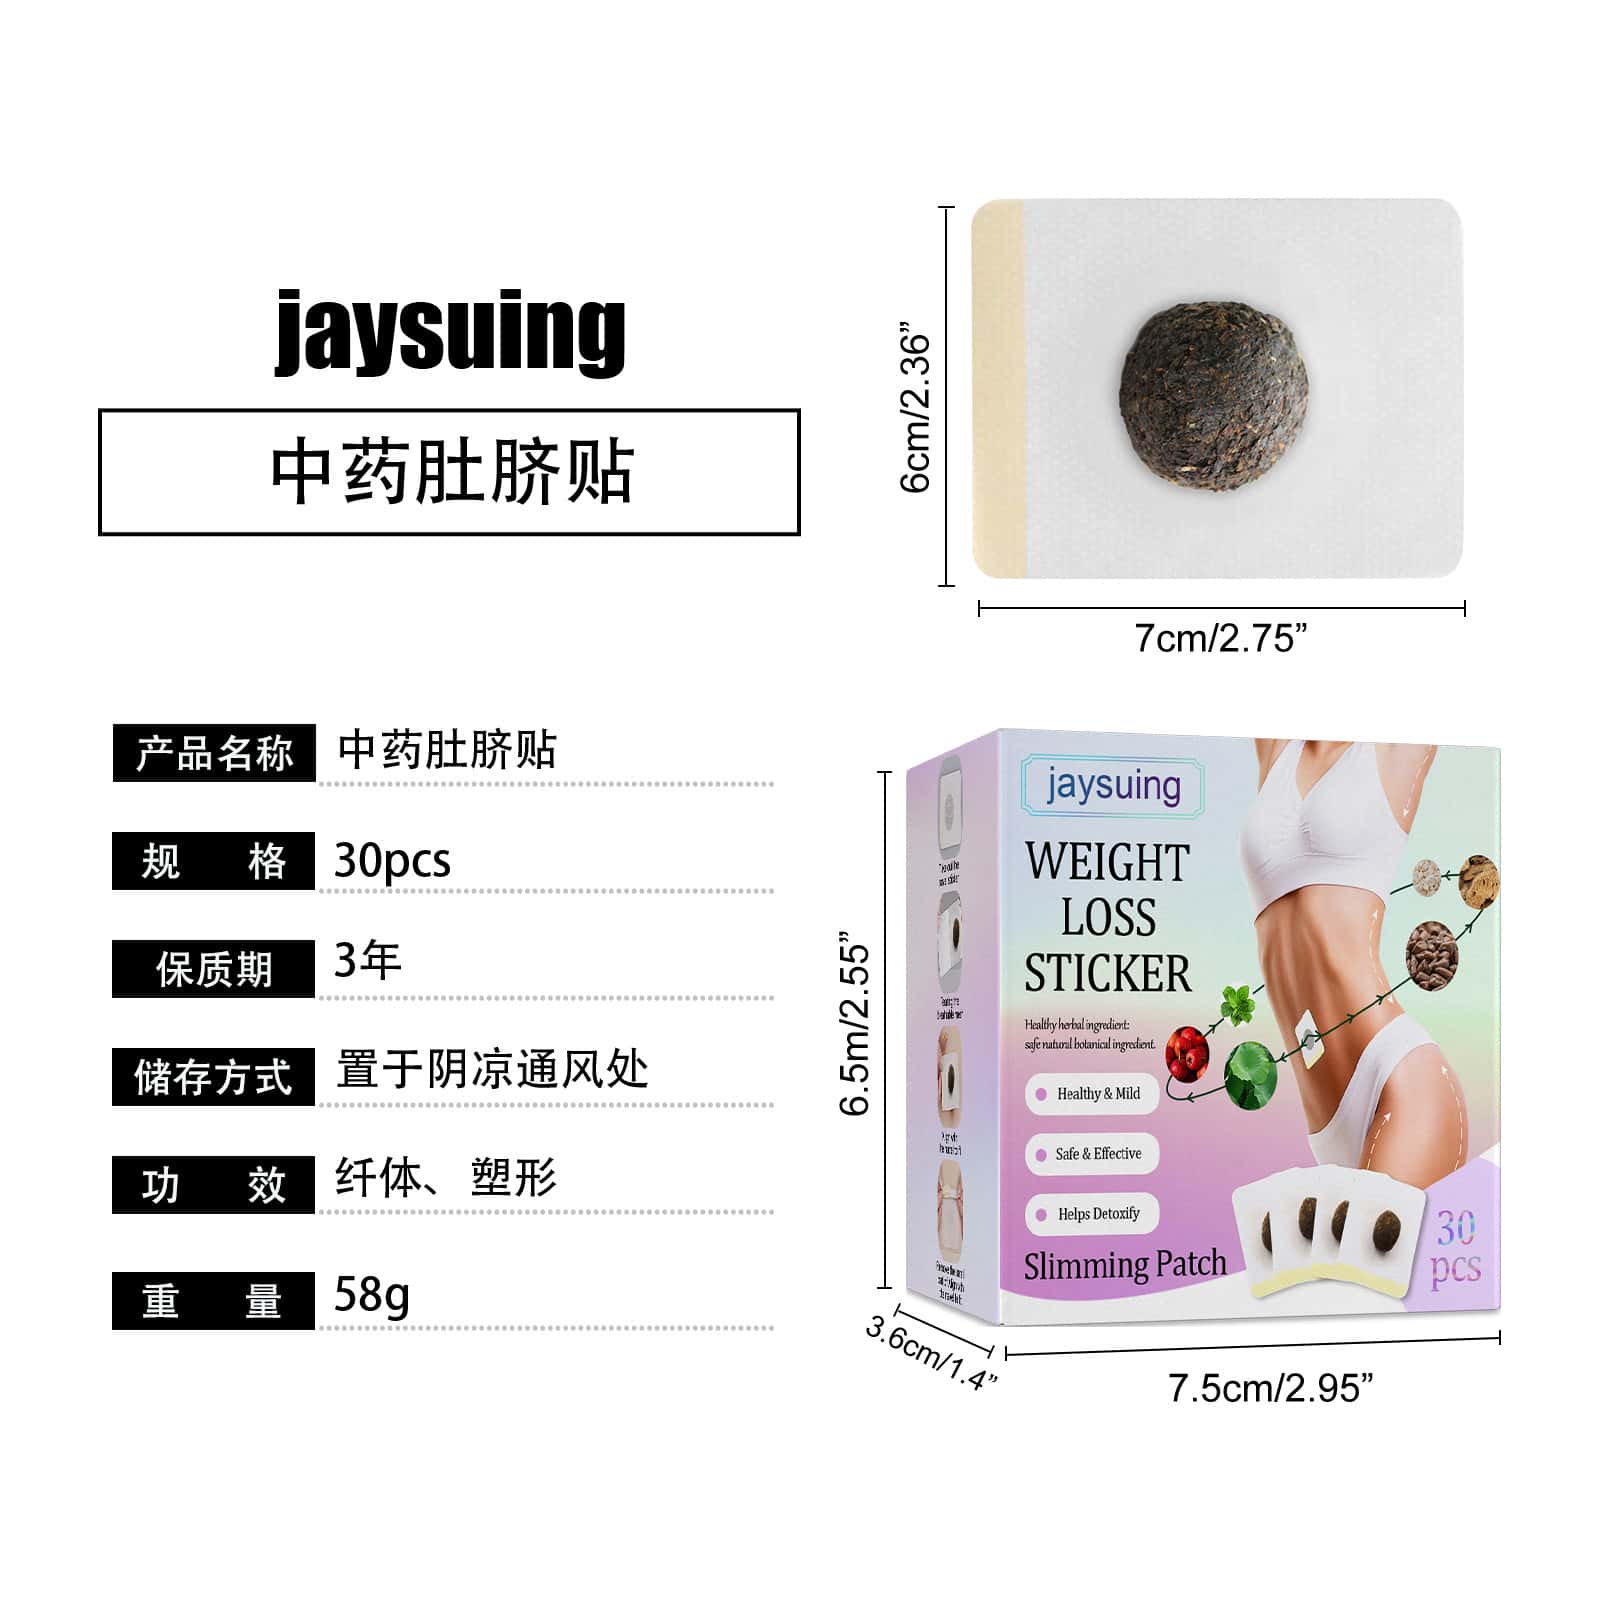 JAYSUING Weight Loss Sticker - Detoxifying Herbal Slimming Patch